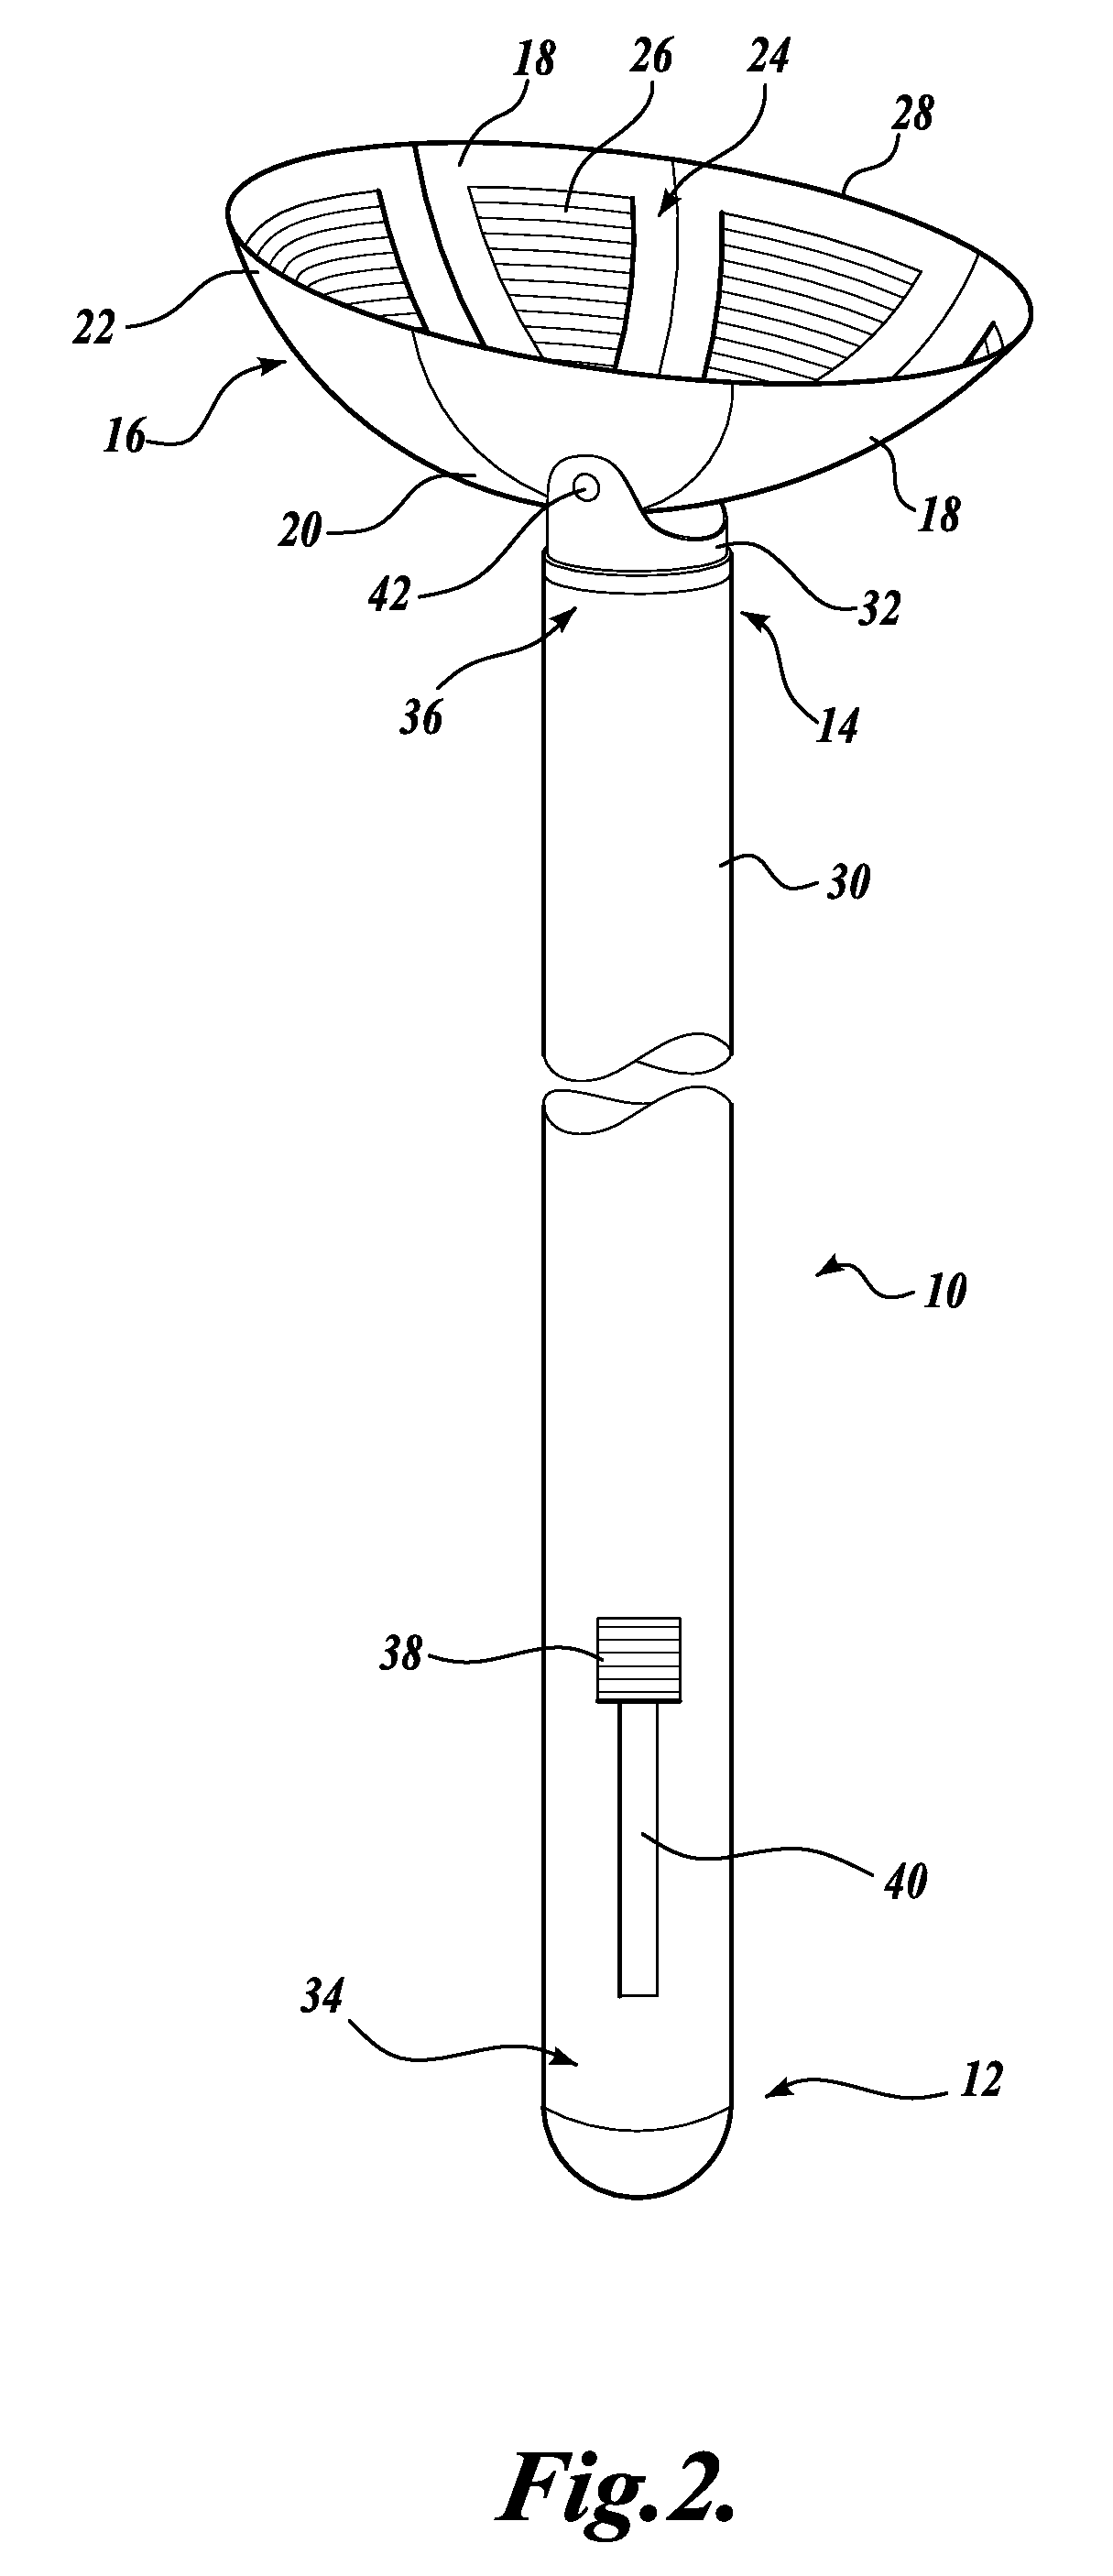 Apparatus for delivering high intensity focused ultrasound energy to a treatment site internal to a patient's body